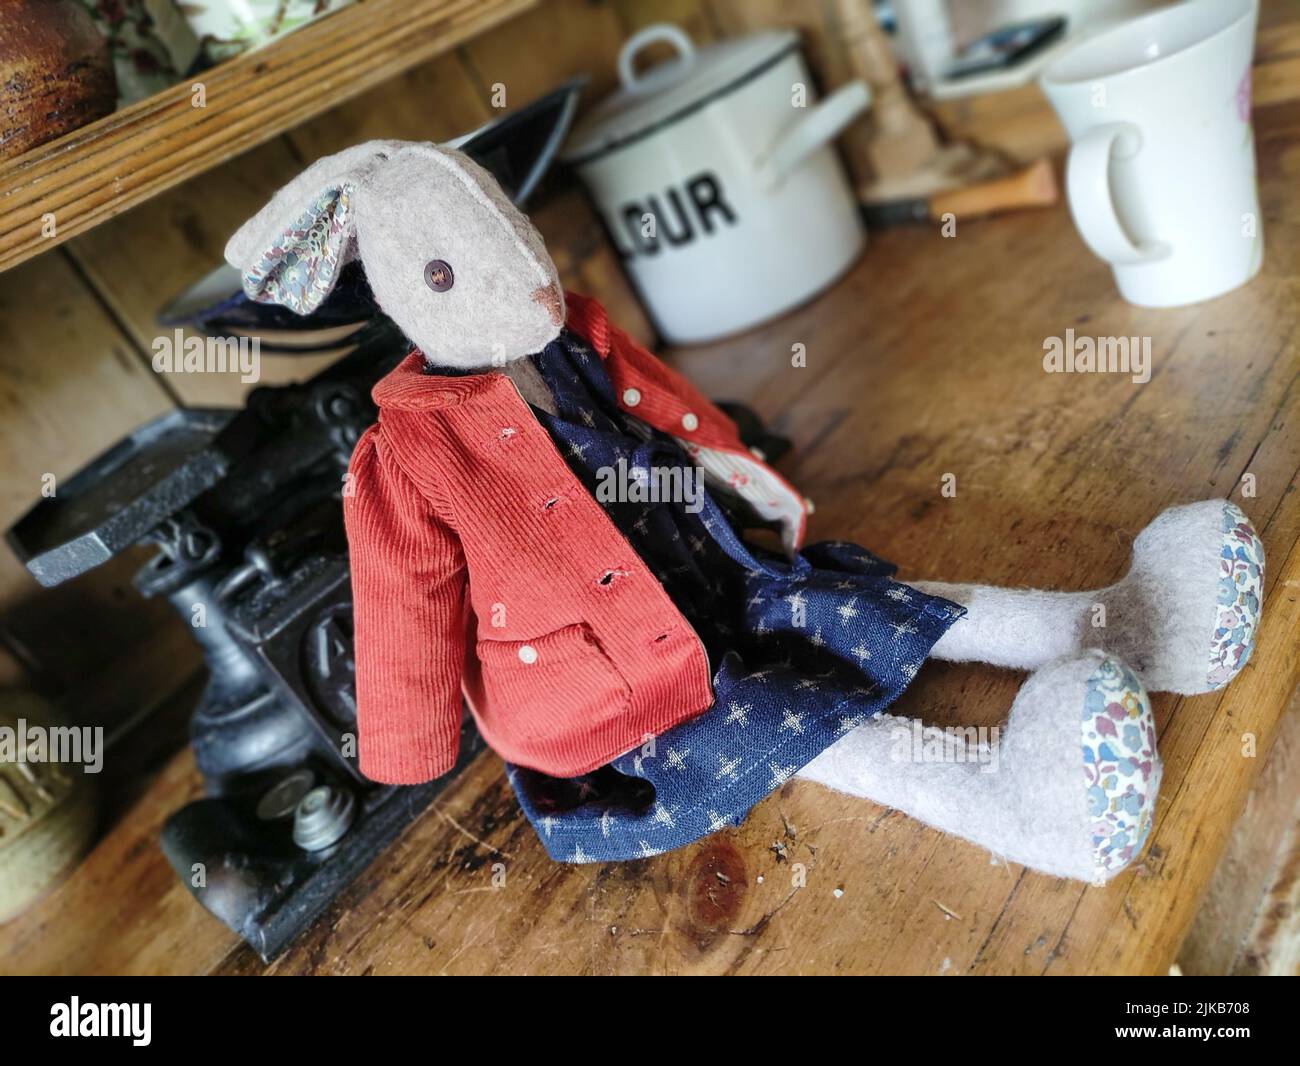 stuff vintage hand made bunny rabbit with cloth on Stock Photo